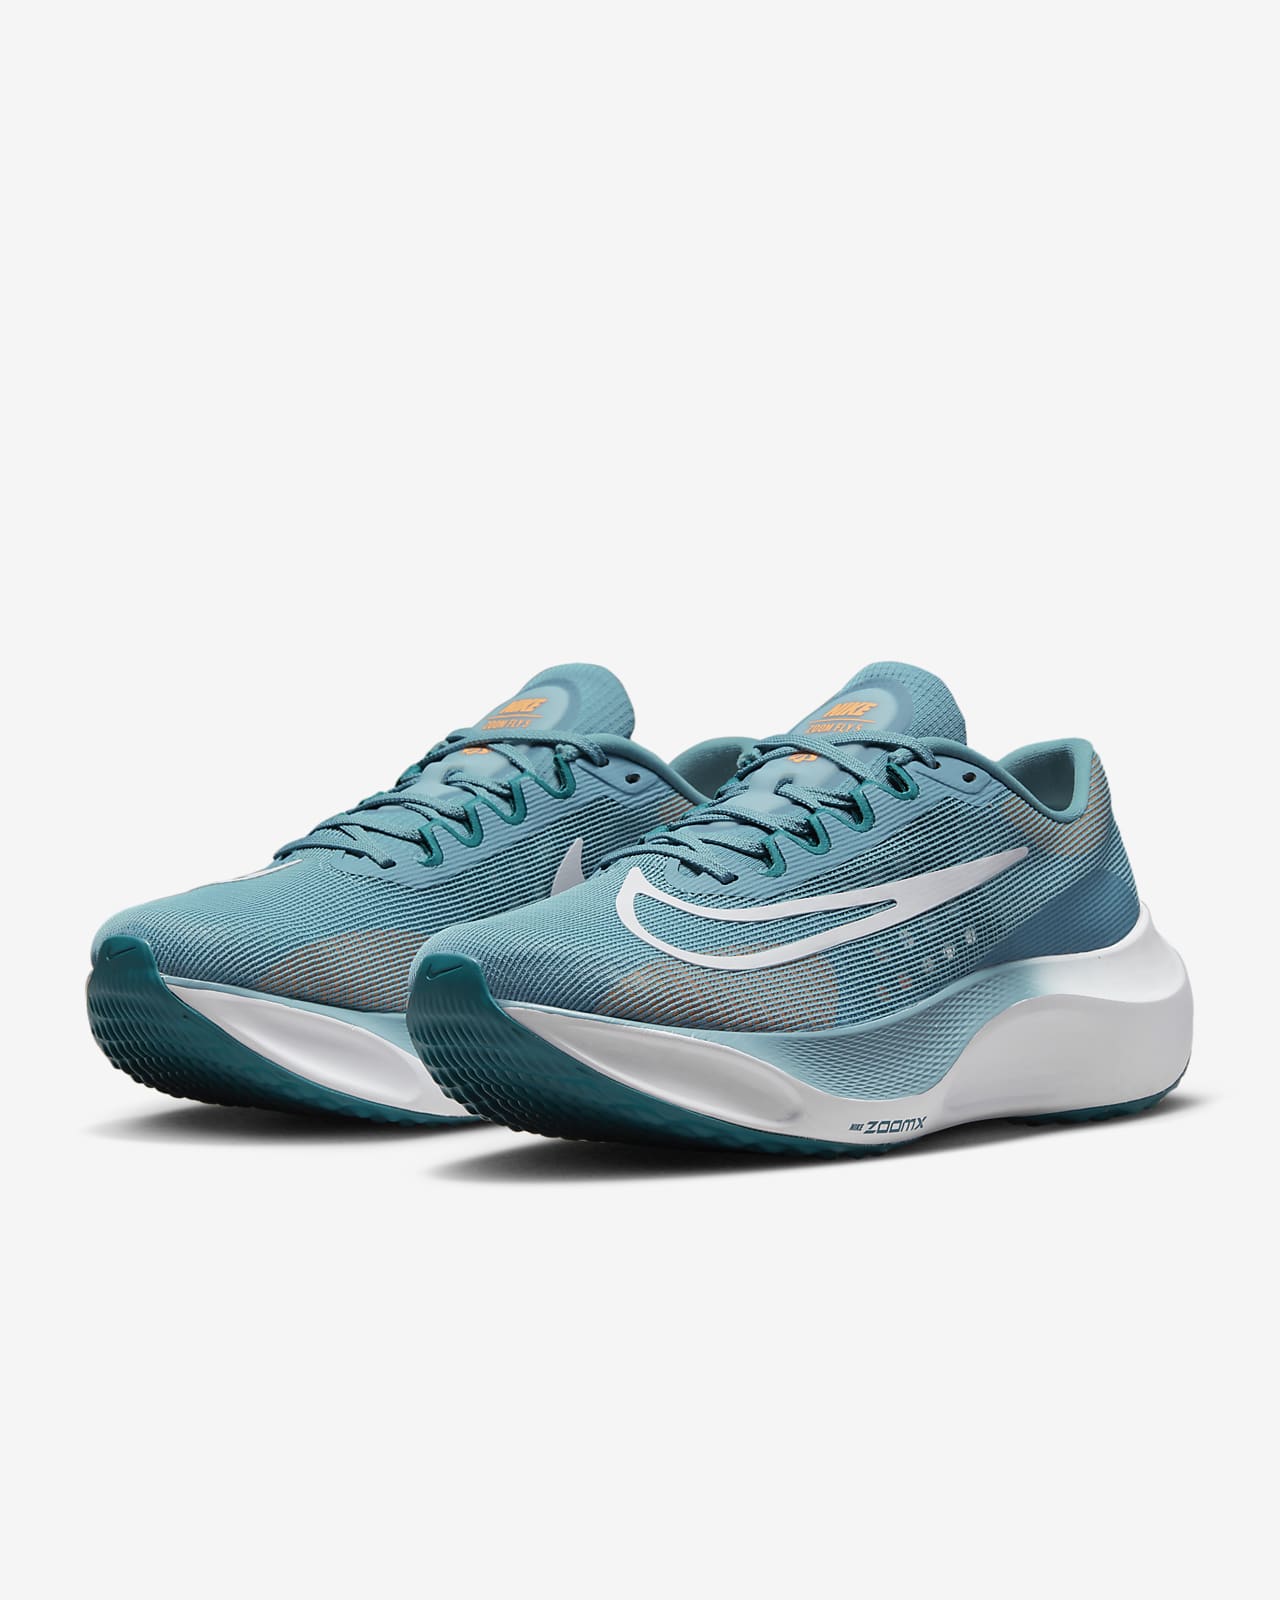 Nike Zoom Fly Flyknit Singapore | vlr.eng.br